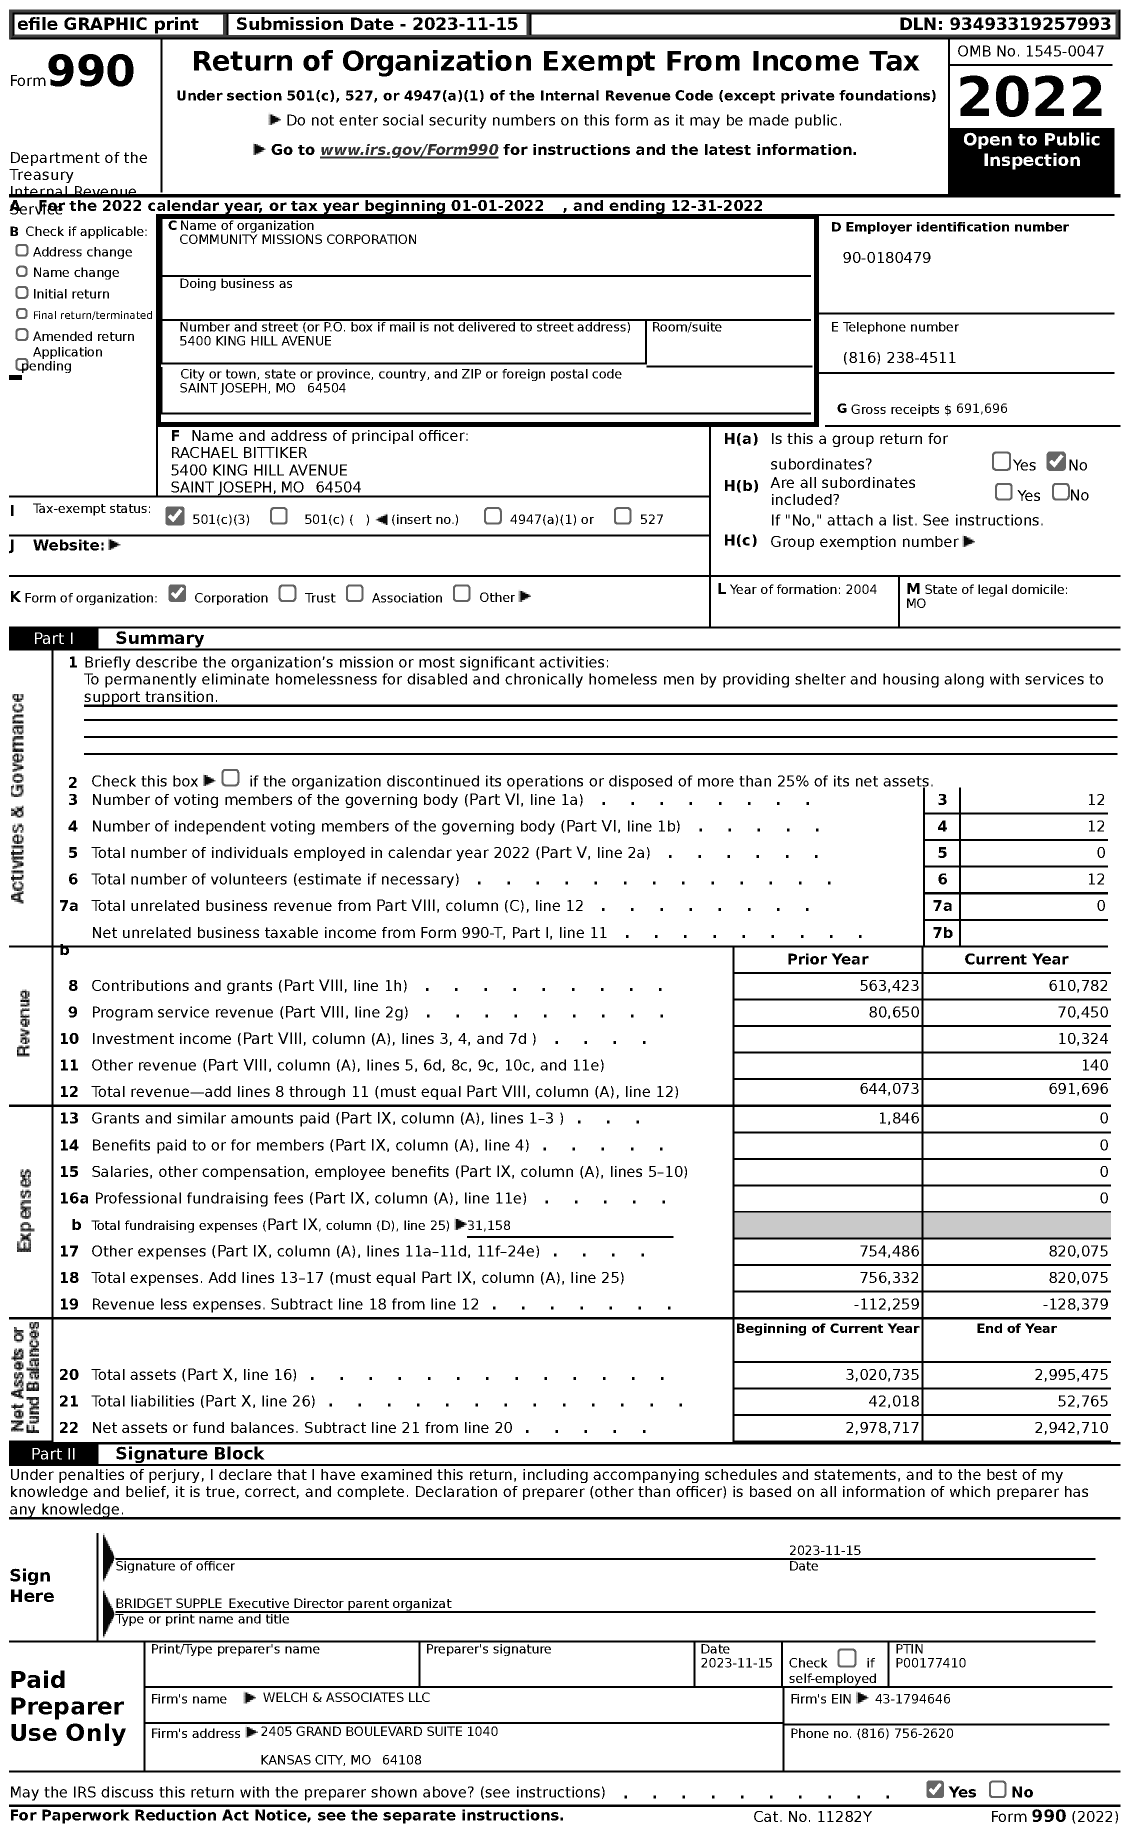 Image of first page of 2022 Form 990 for Community Missions Corporation